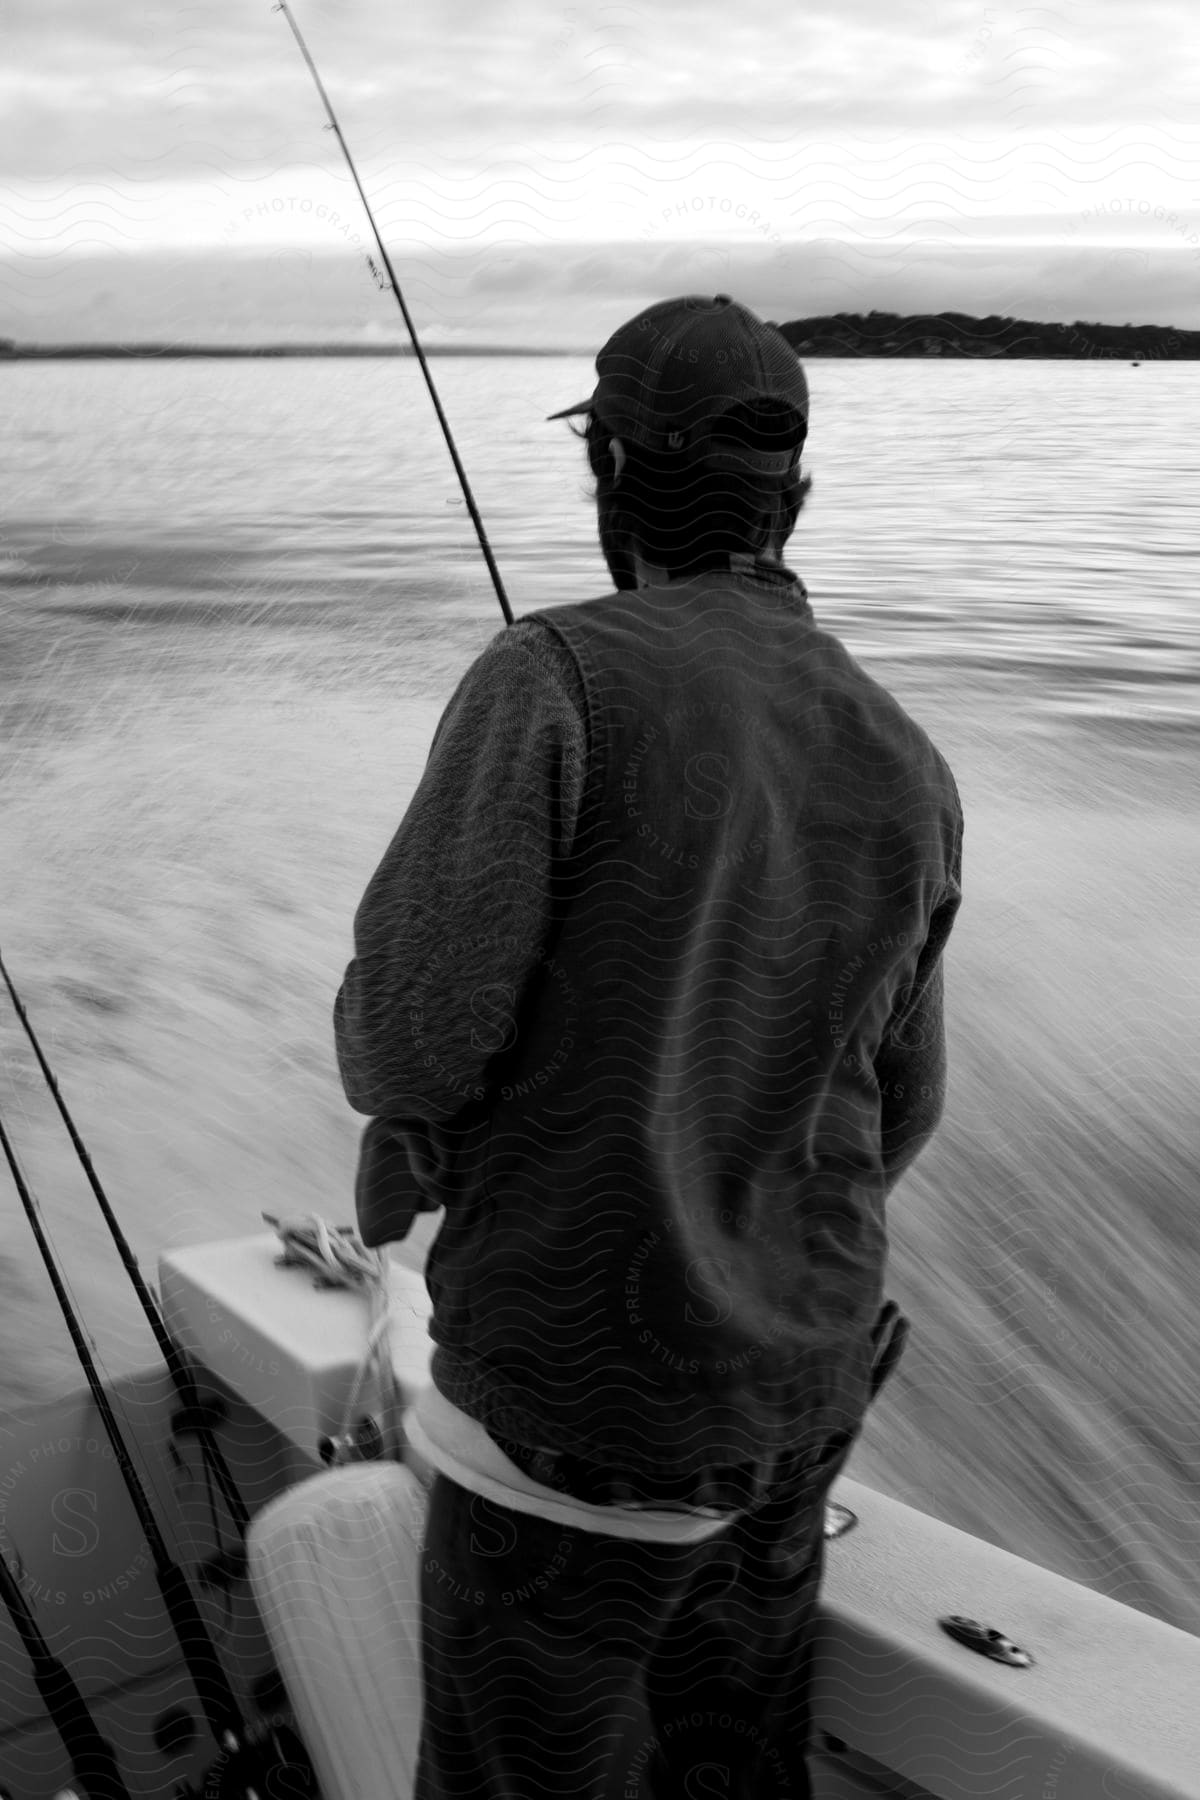 Man skillfully casts fishing line from boat in anticipation of catching a fish